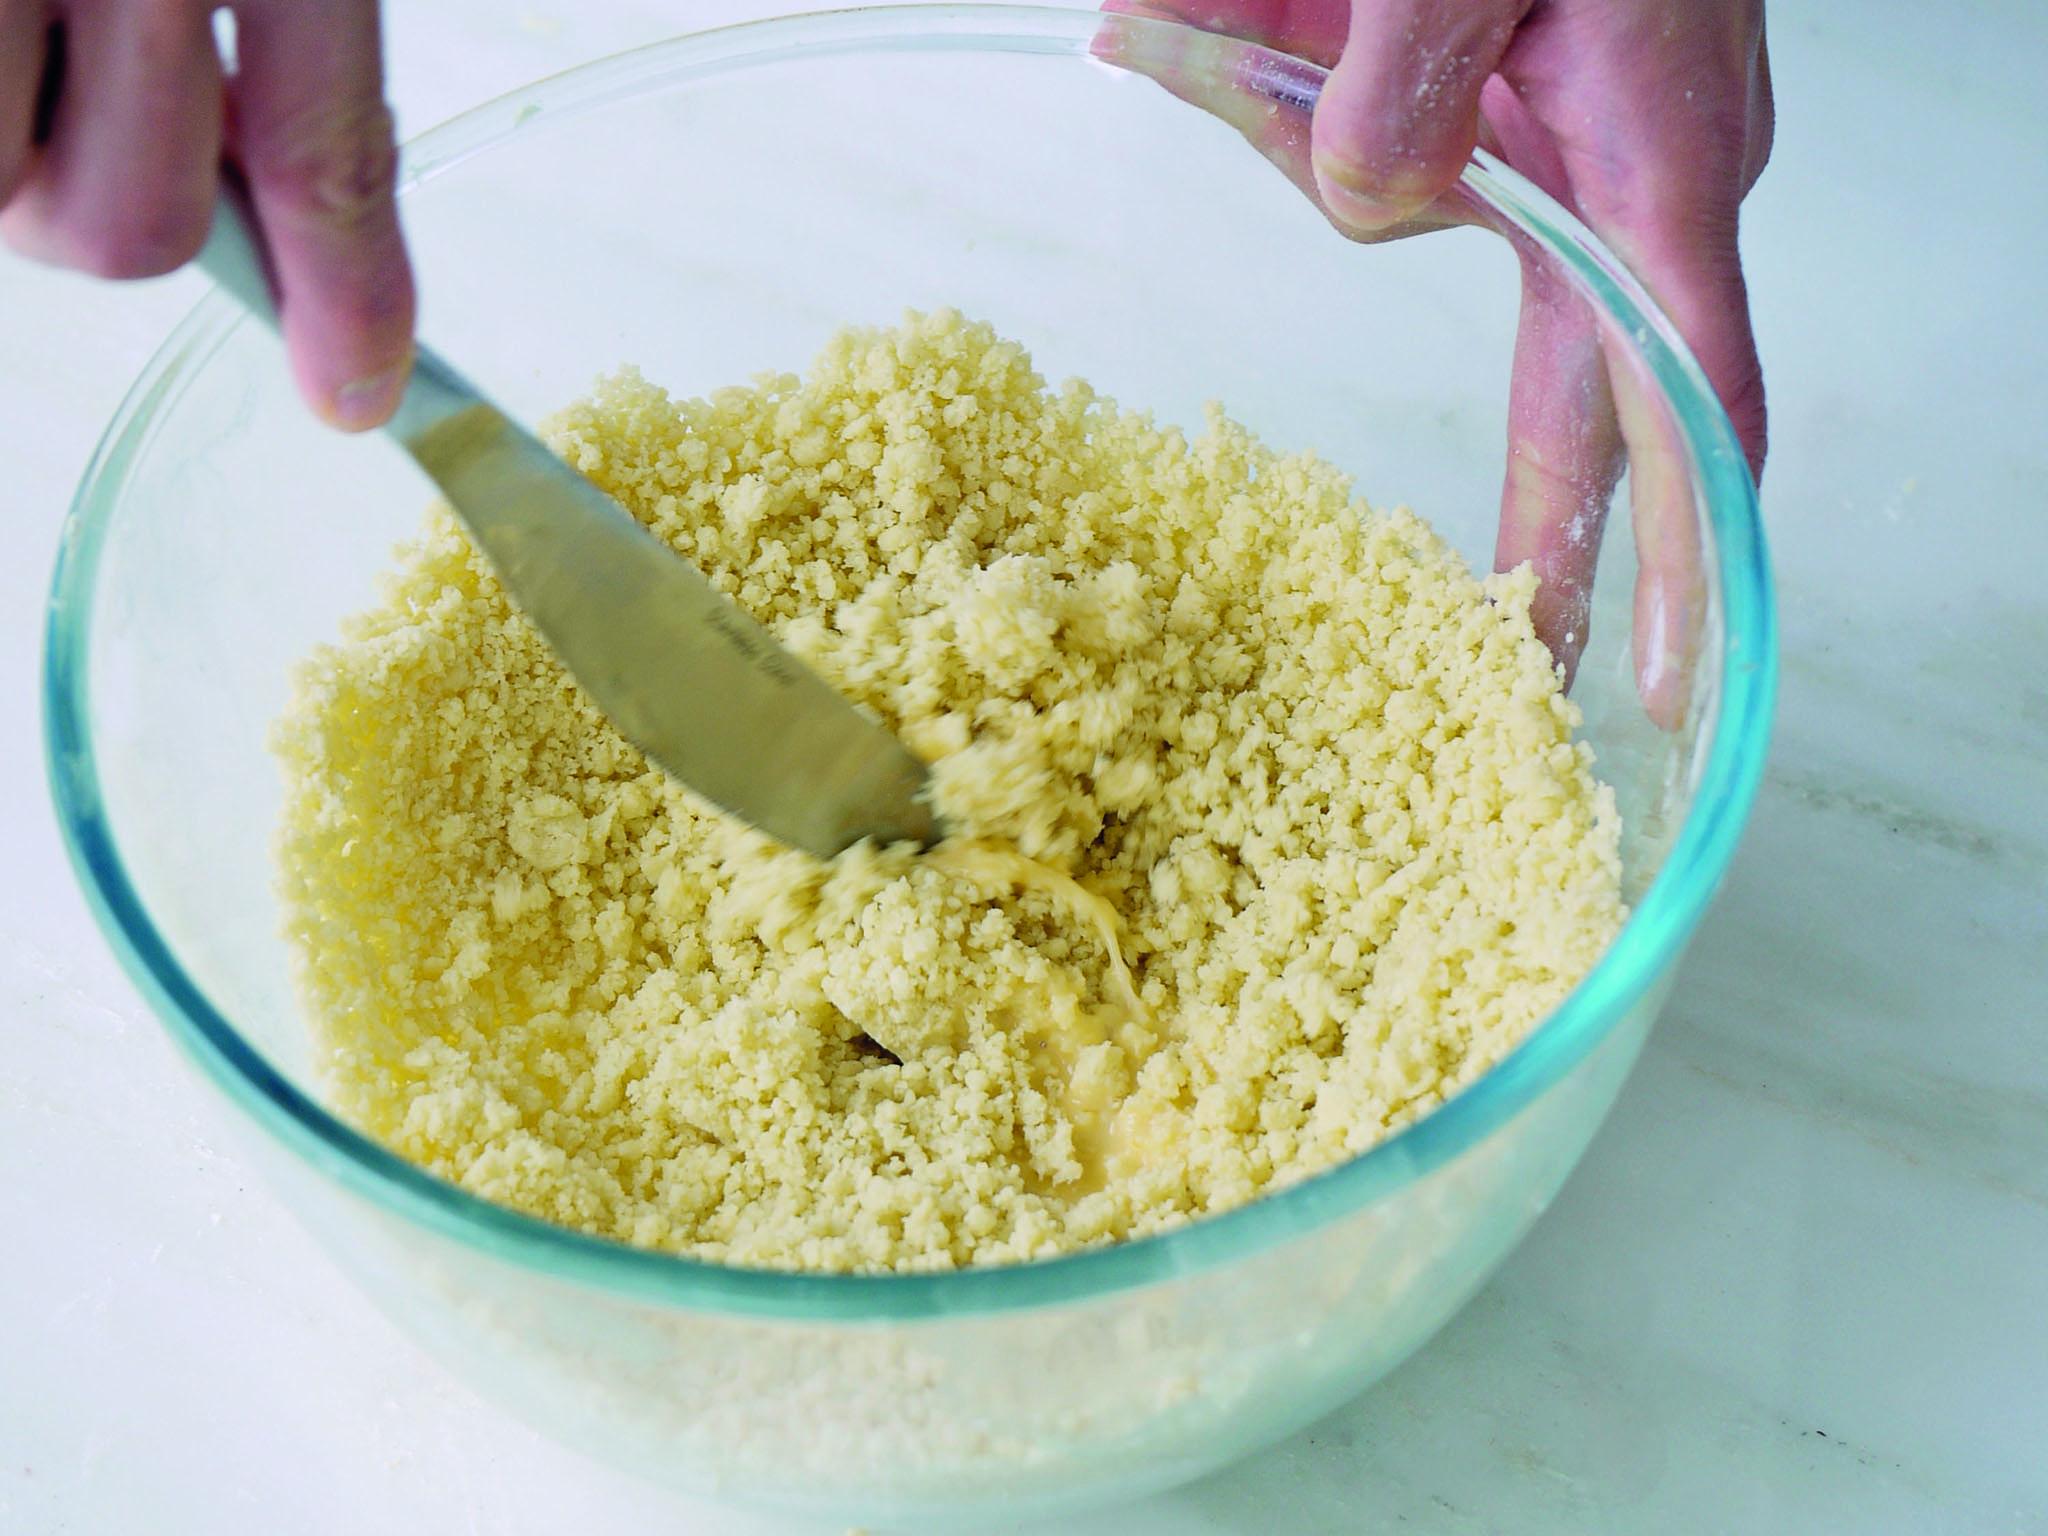 7. Use the flat of the knife to bring a few of the flakes and dry crumb together, to create larger lumps. At this stage, the pastry should be uniform in colour, not streaky. Continue like this until there are no dry crumbs in the bottom of the bowl